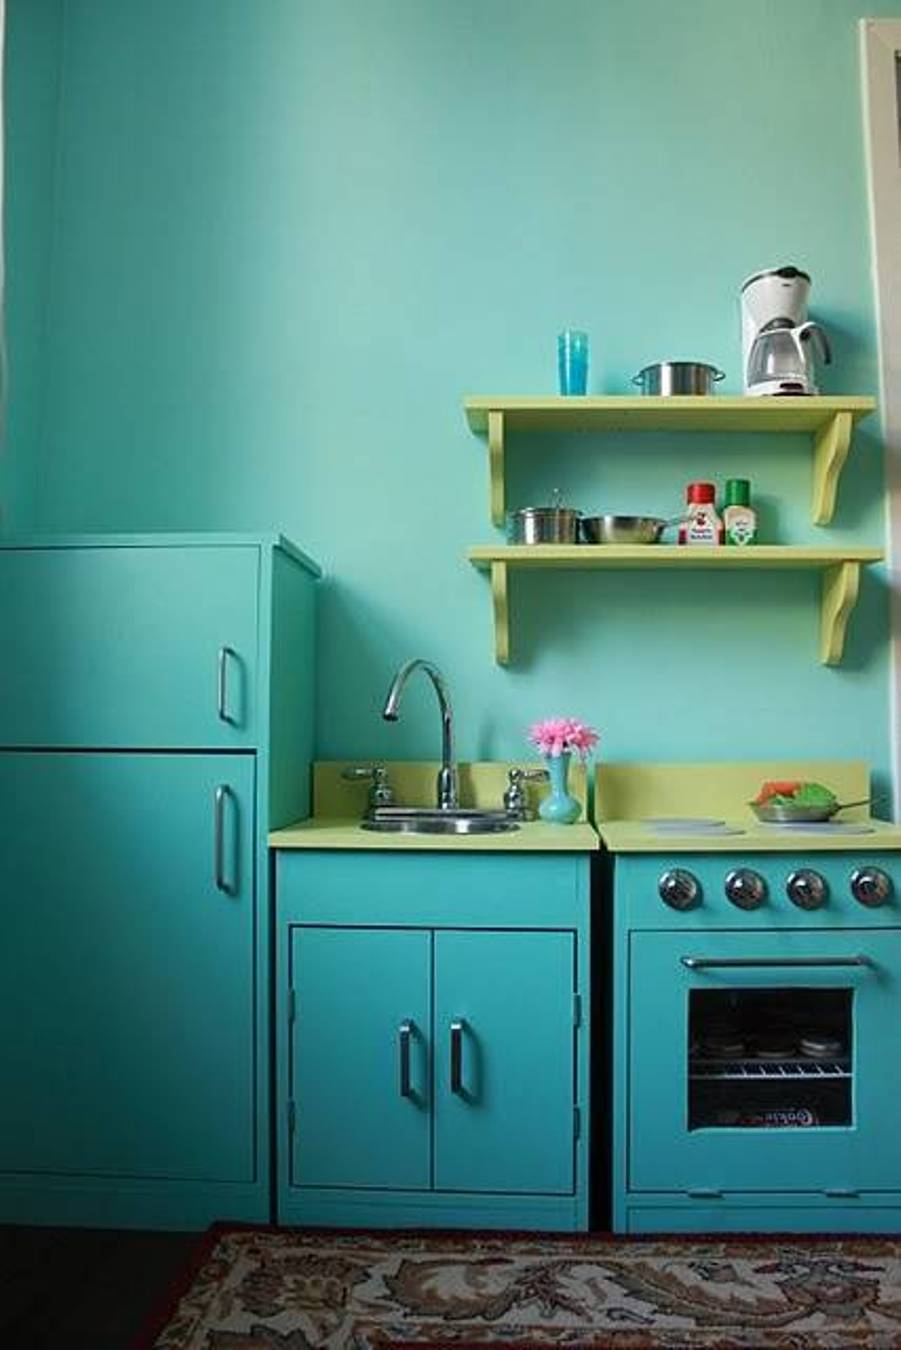 kitchen-turquoise-walls-with-green-open-shelving-and-free-standing-range-and-sink-and-pantry